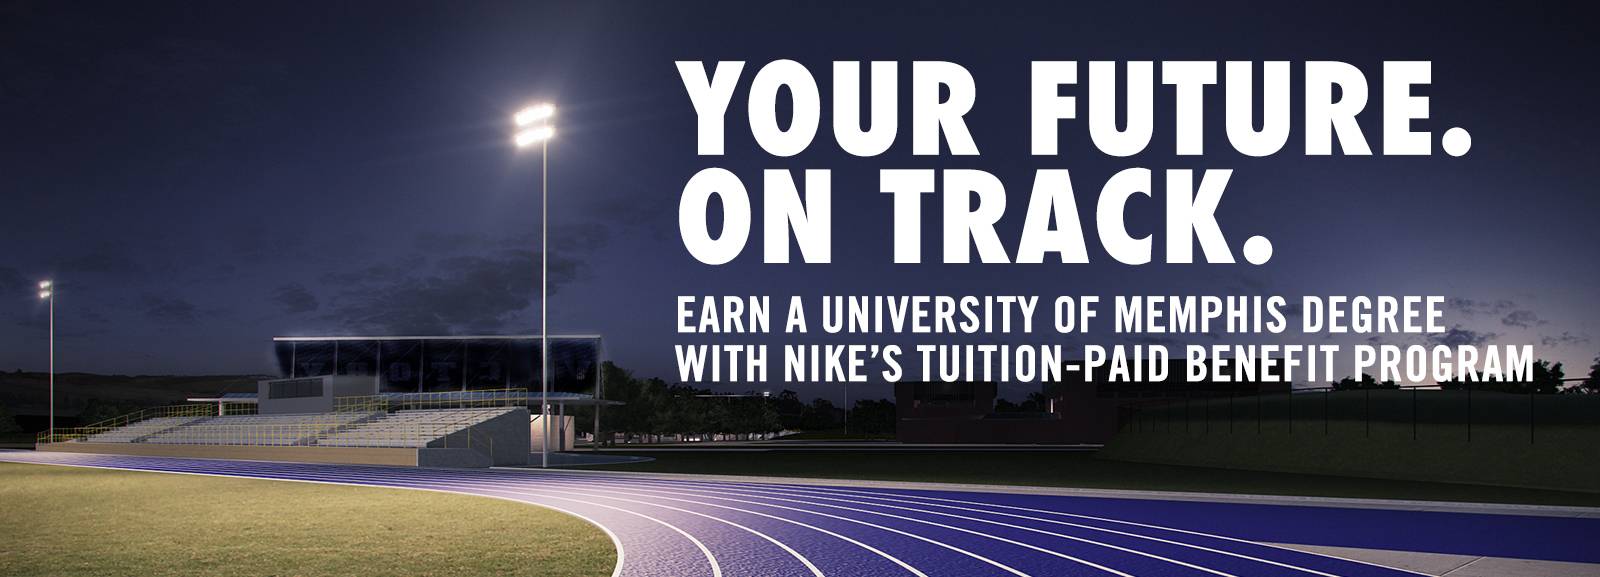 Your Future. On Track. Earn a University of Memphis Degree with Nike's Tuition-Paid benefit program.